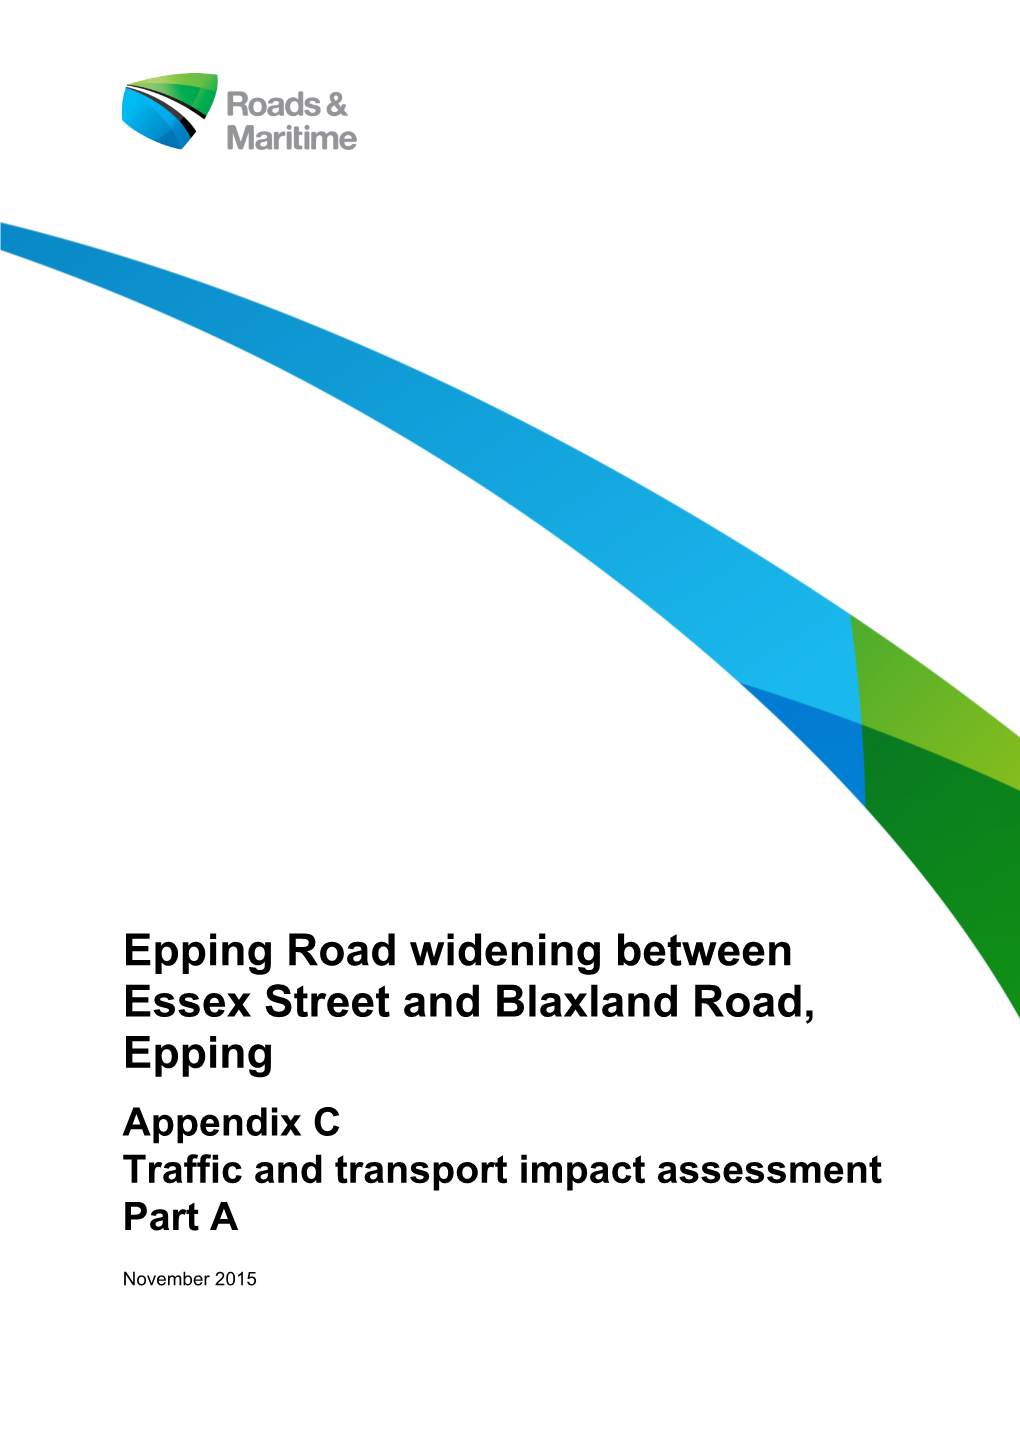 Epping Road Widening Between Essex Street and Blaxland Road, Epping Appendix C Traffic and Transport Impact Assessment Part A